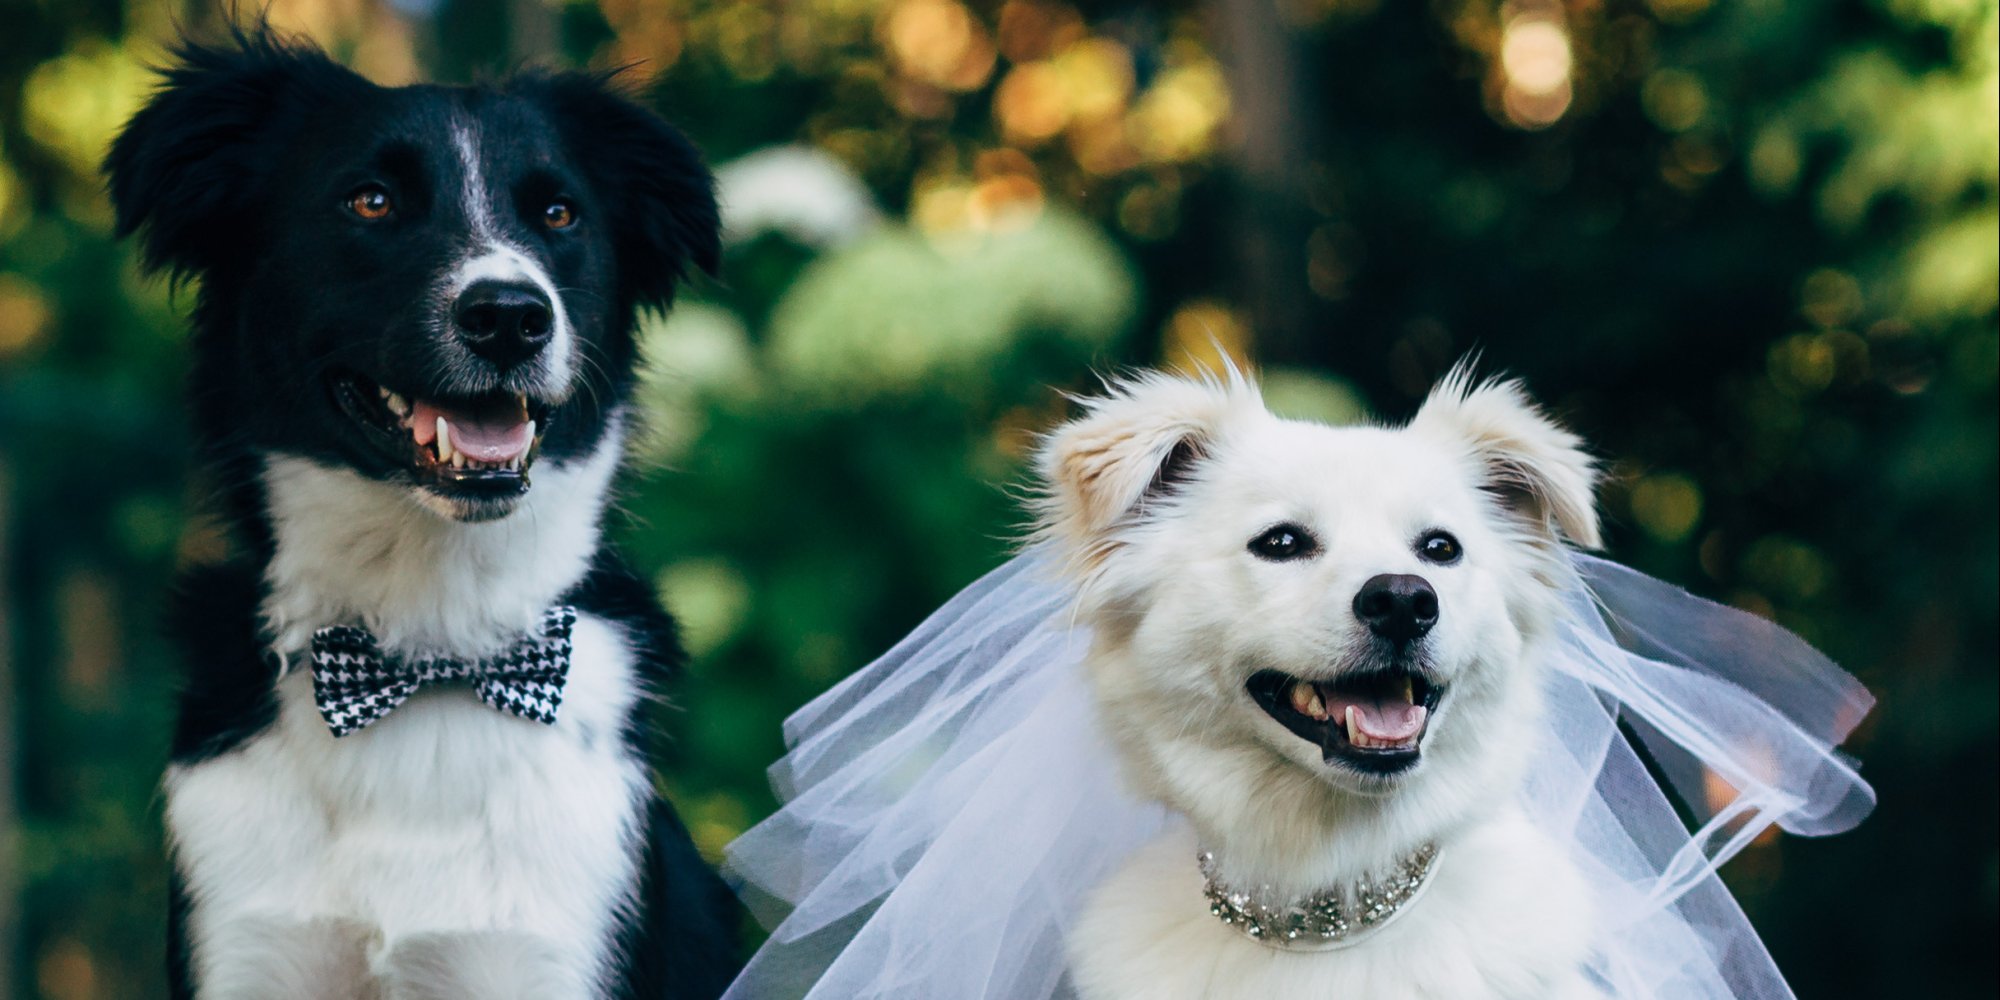 These Furry Friends Made Their Love Official In The Cutest Canine